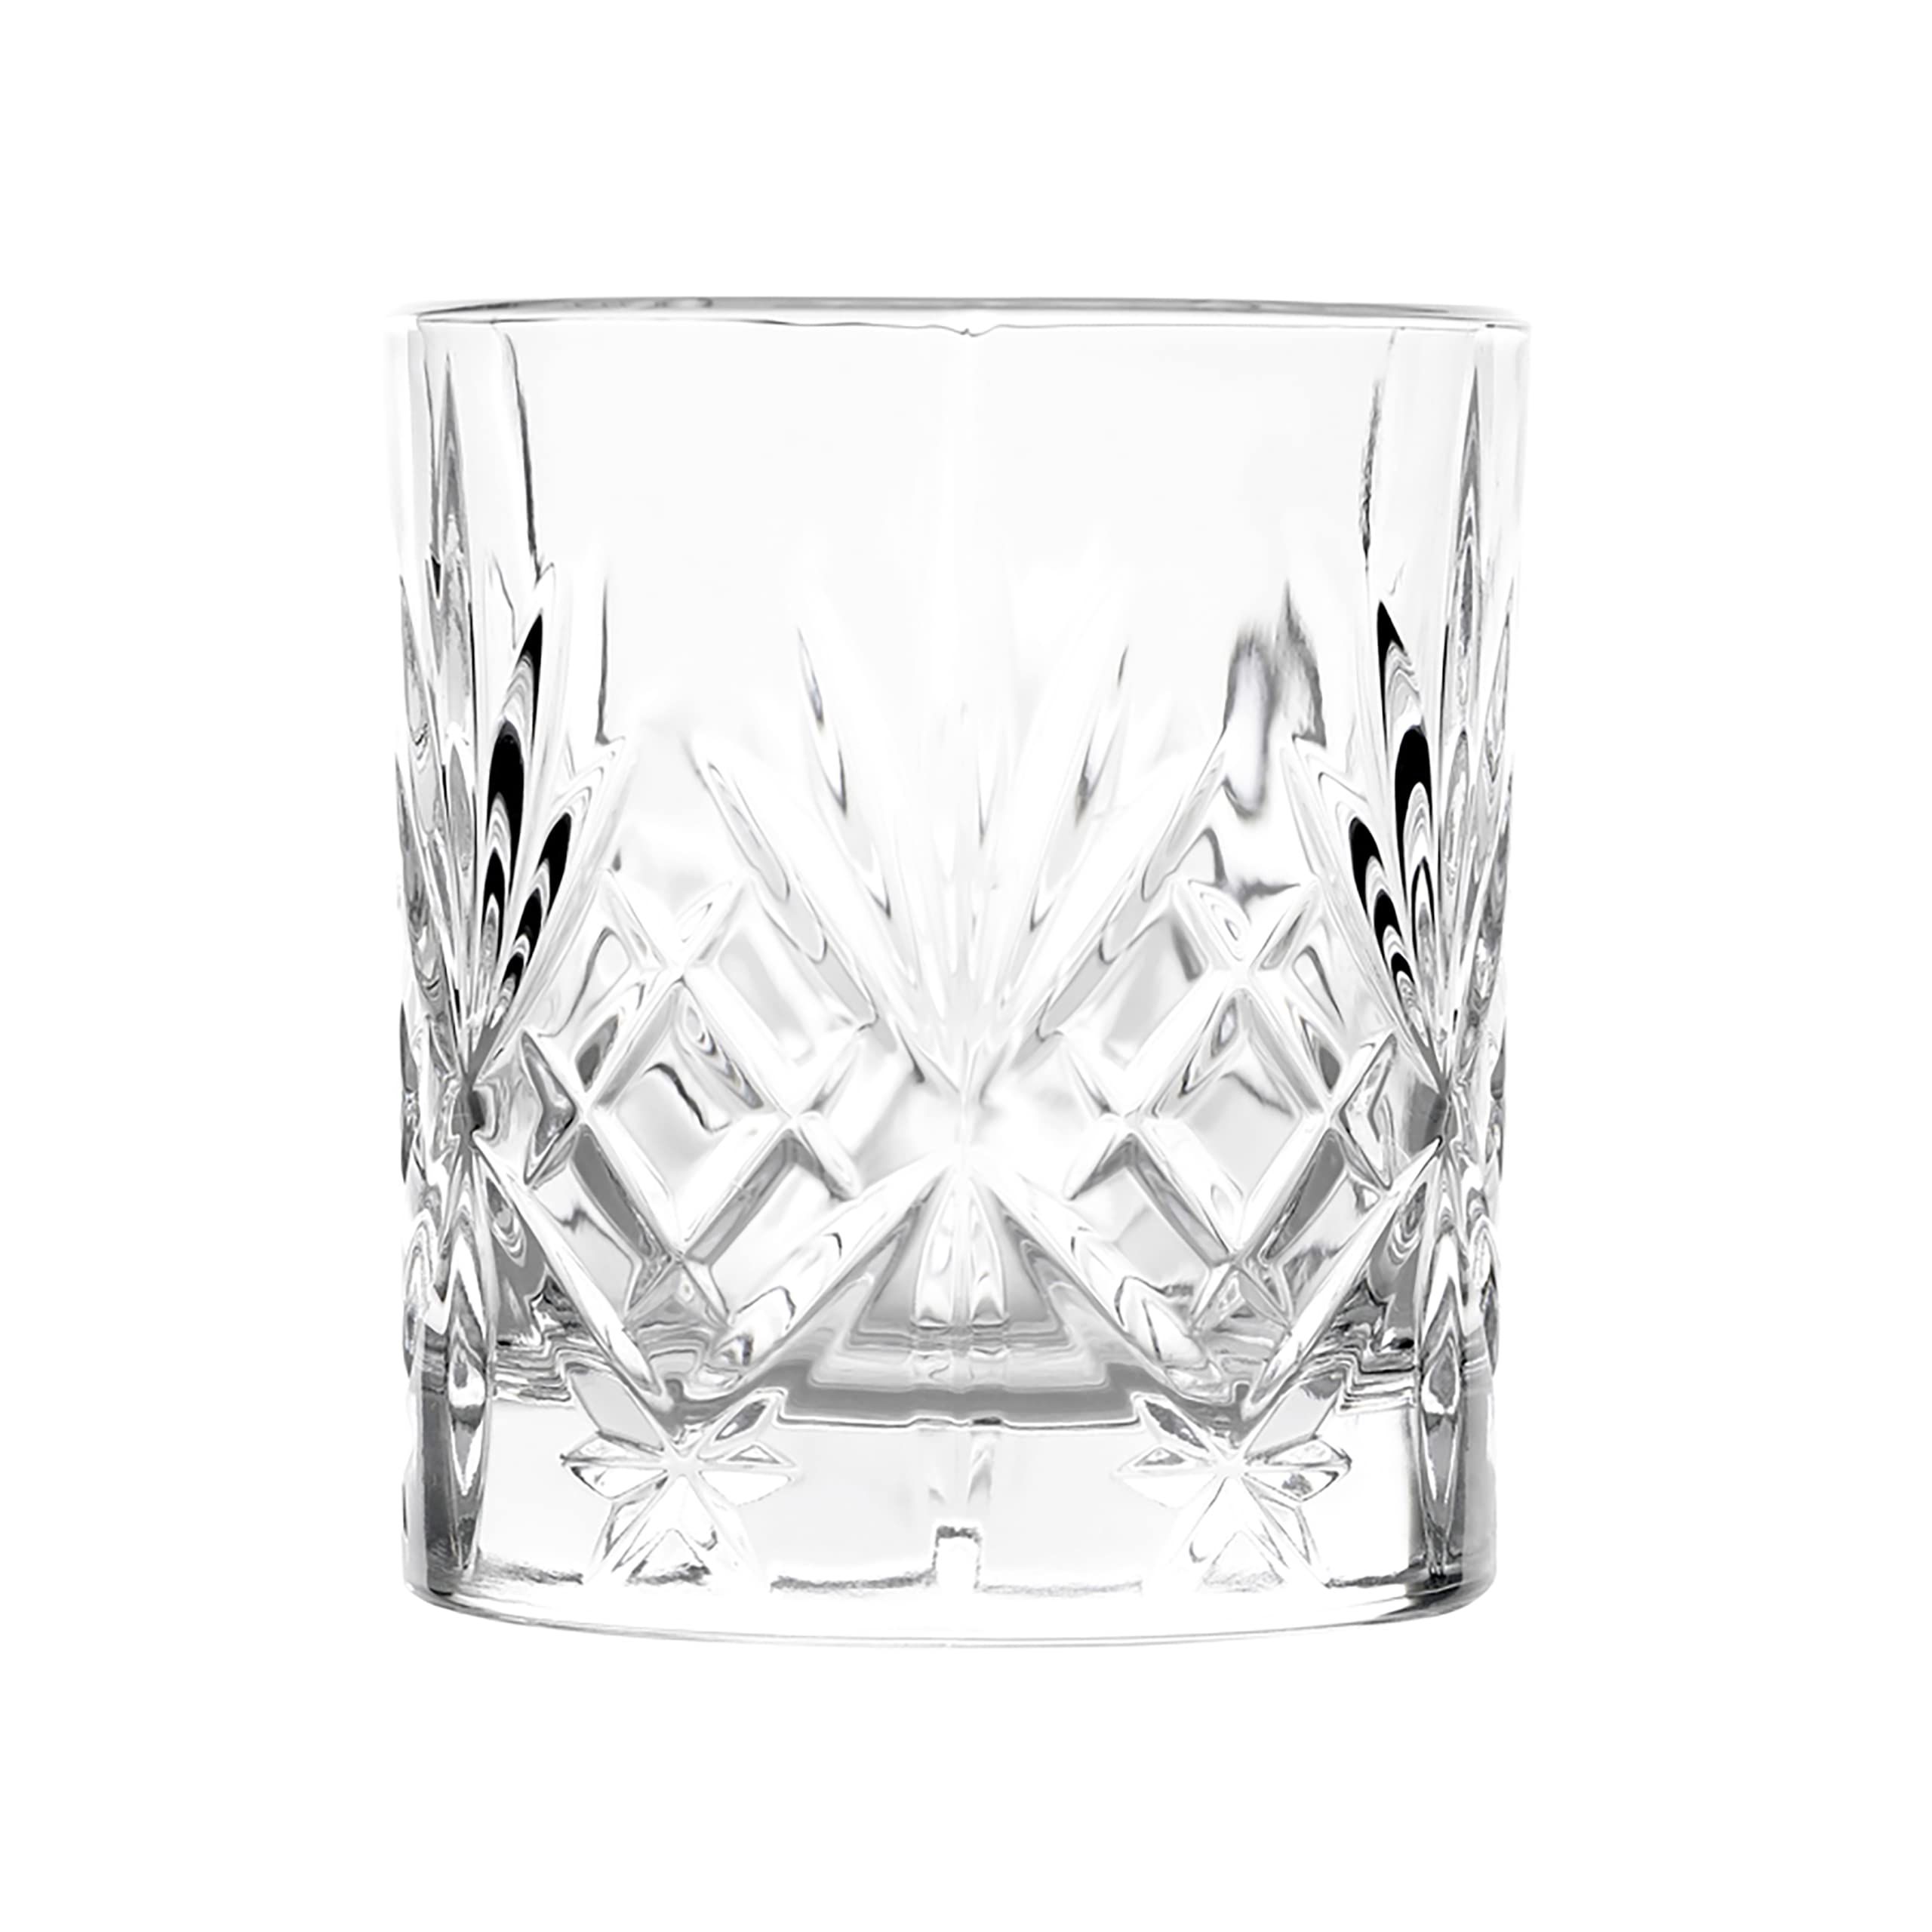 RCR 25935020006 Melodia Crystal Short Whisky Water Tumblers Glasses, 230 ml, Set of 6-Clear